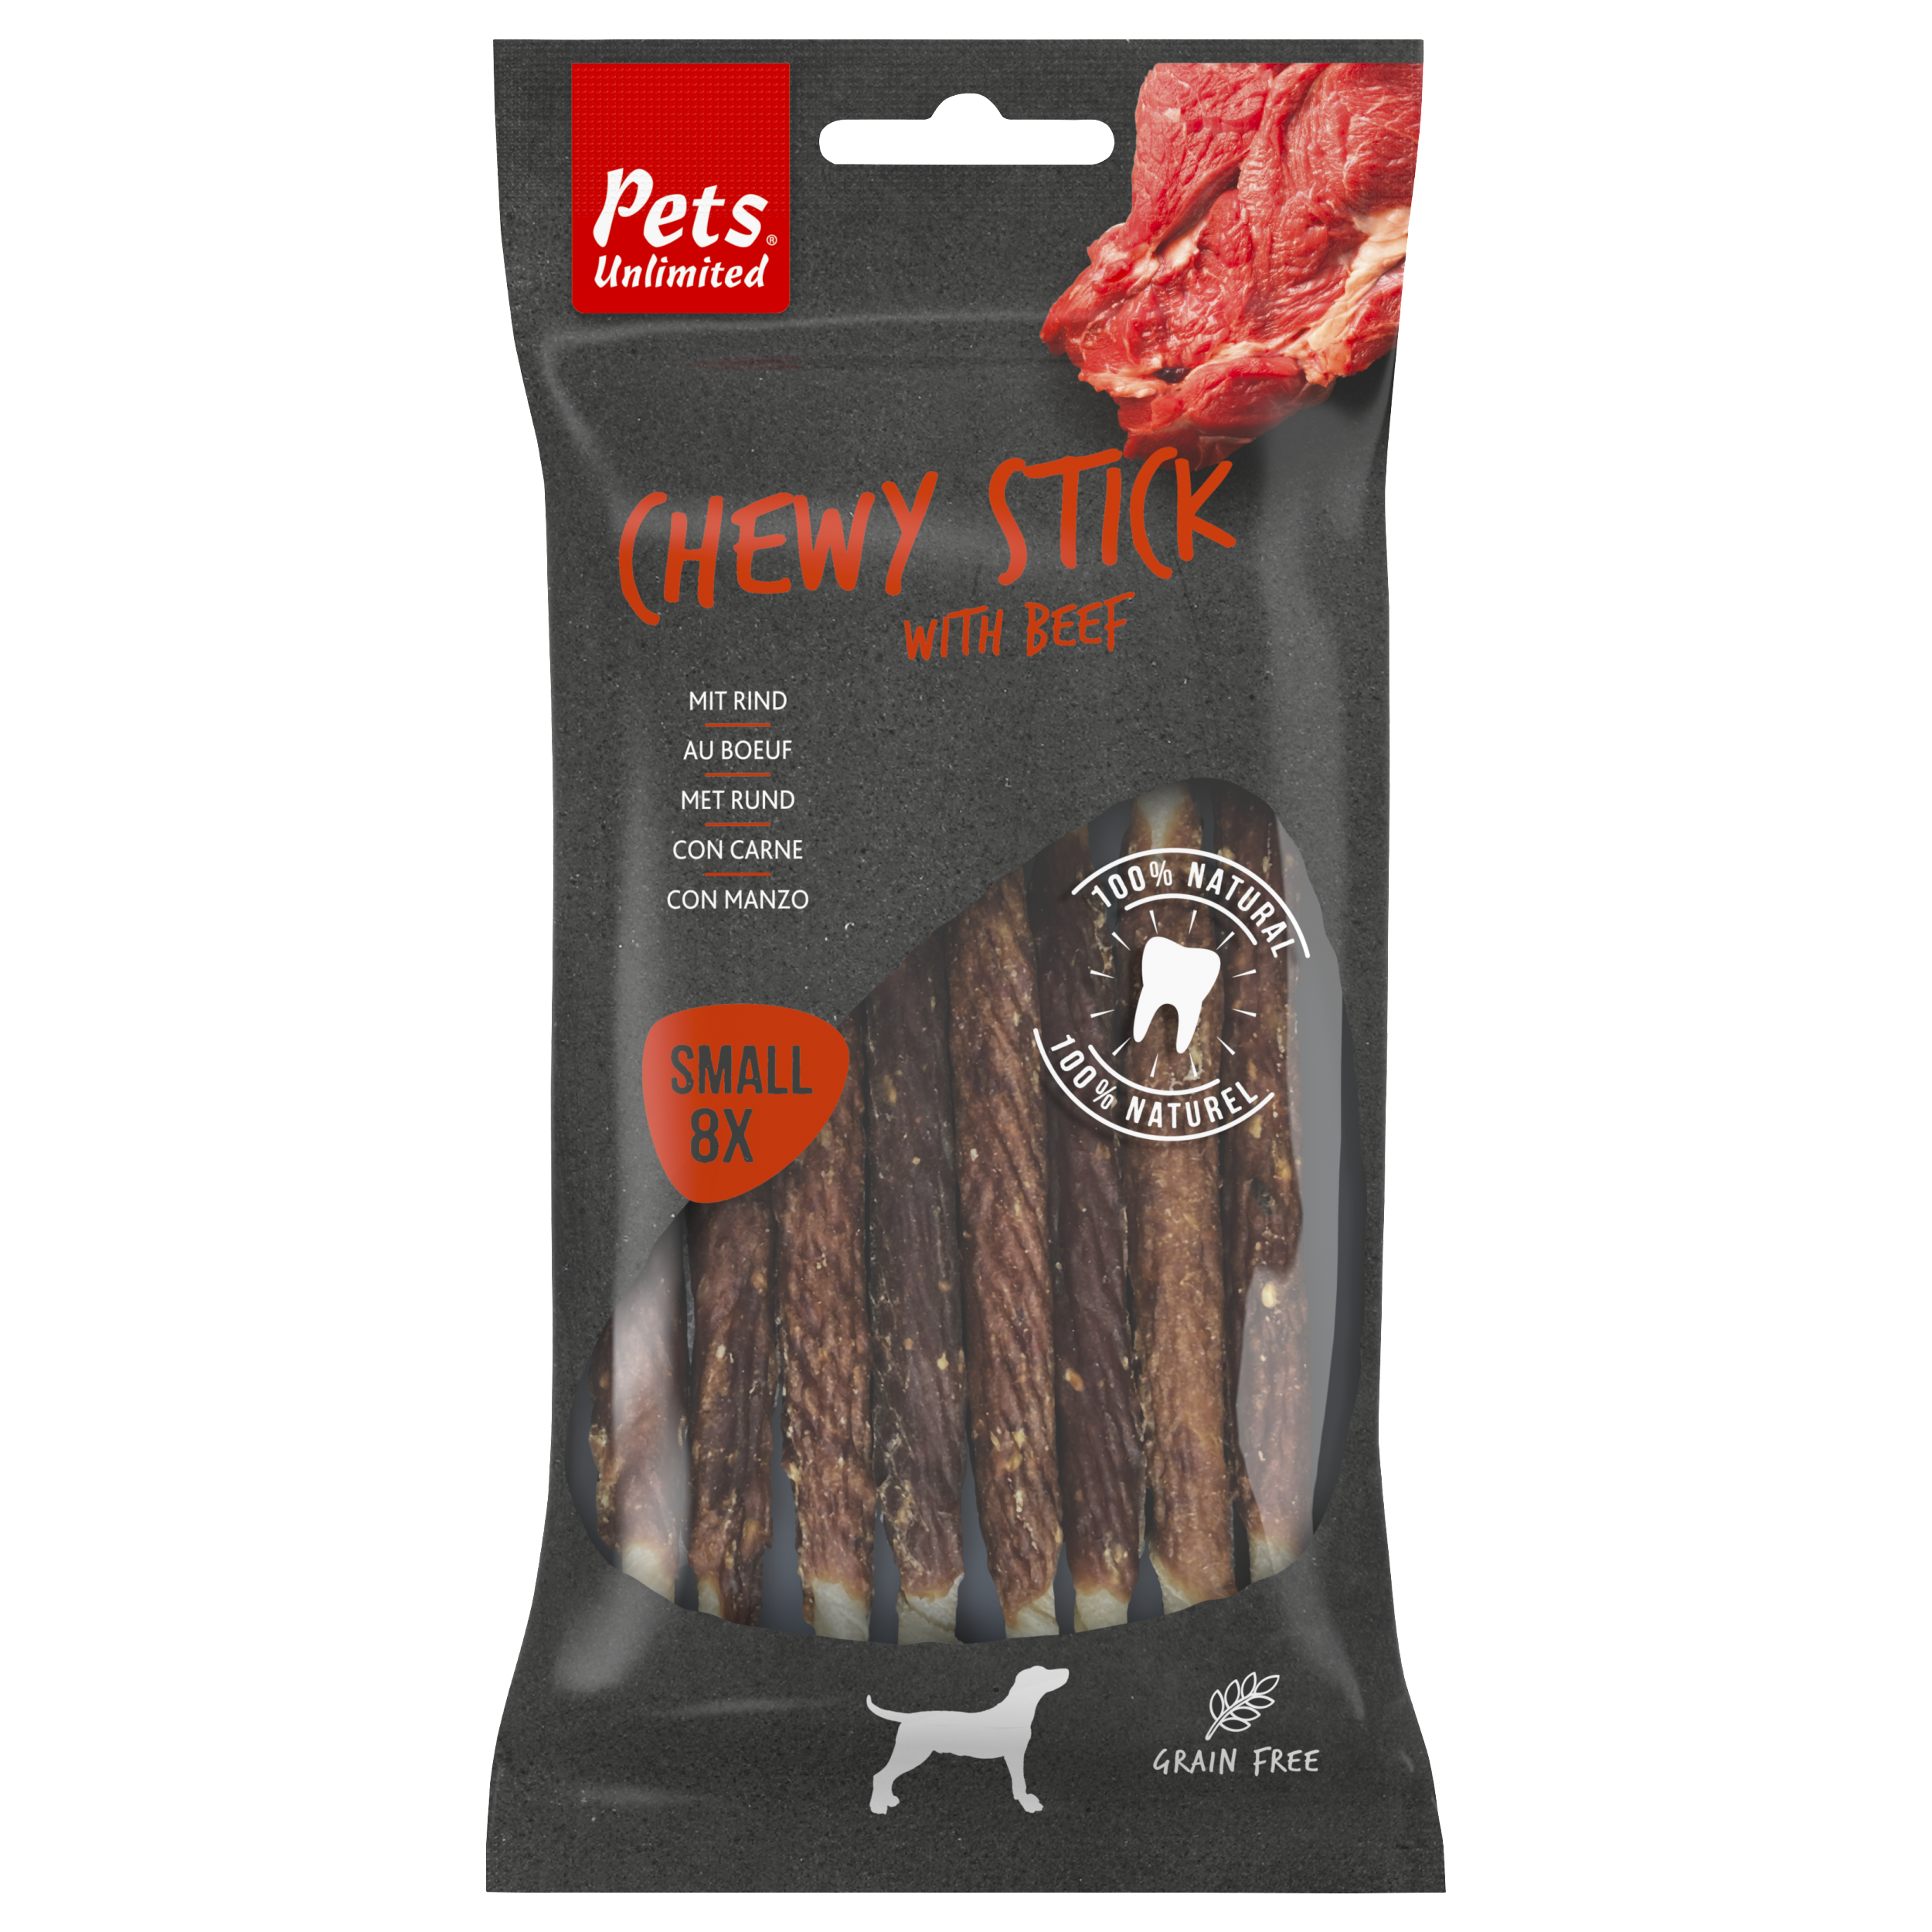 Chewy sticks with beef small, 8 pieces